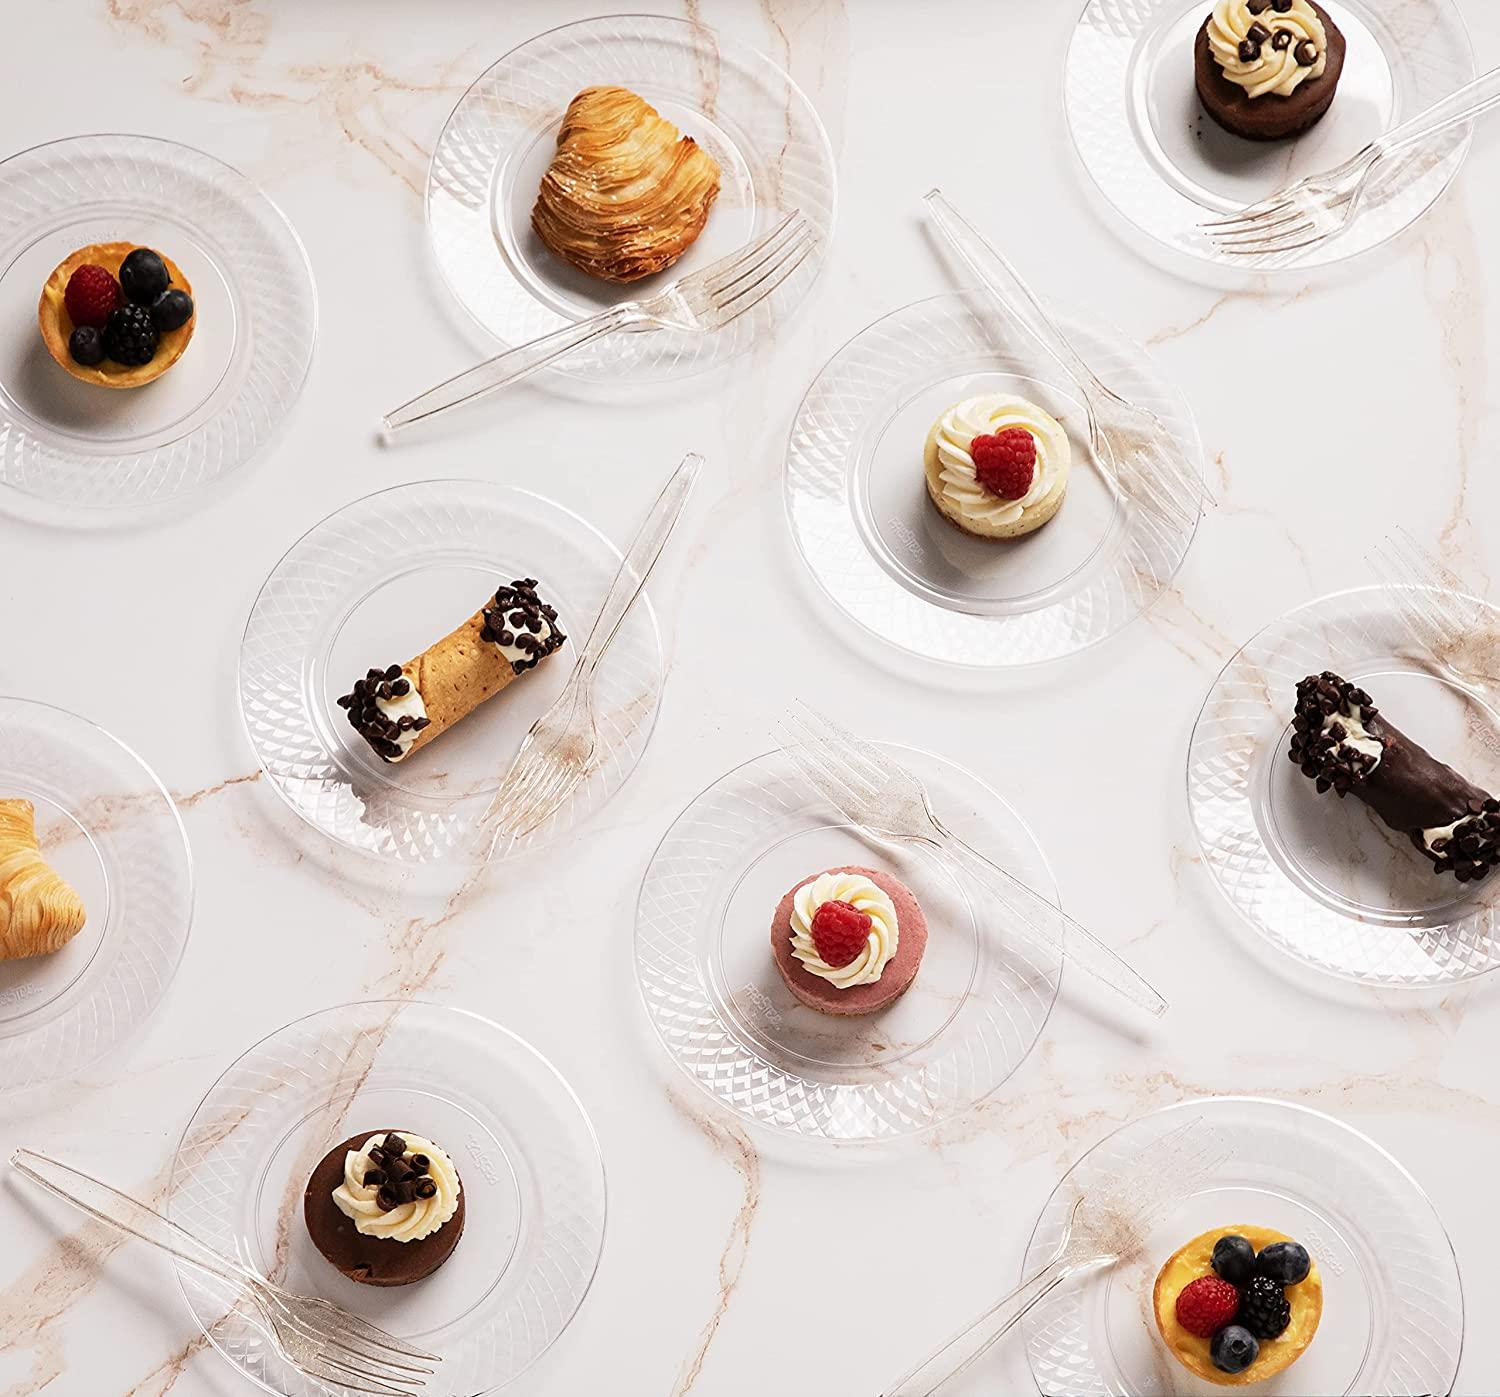 Creative Converting Disposable Wedding Dessert Plate for 24 Guests